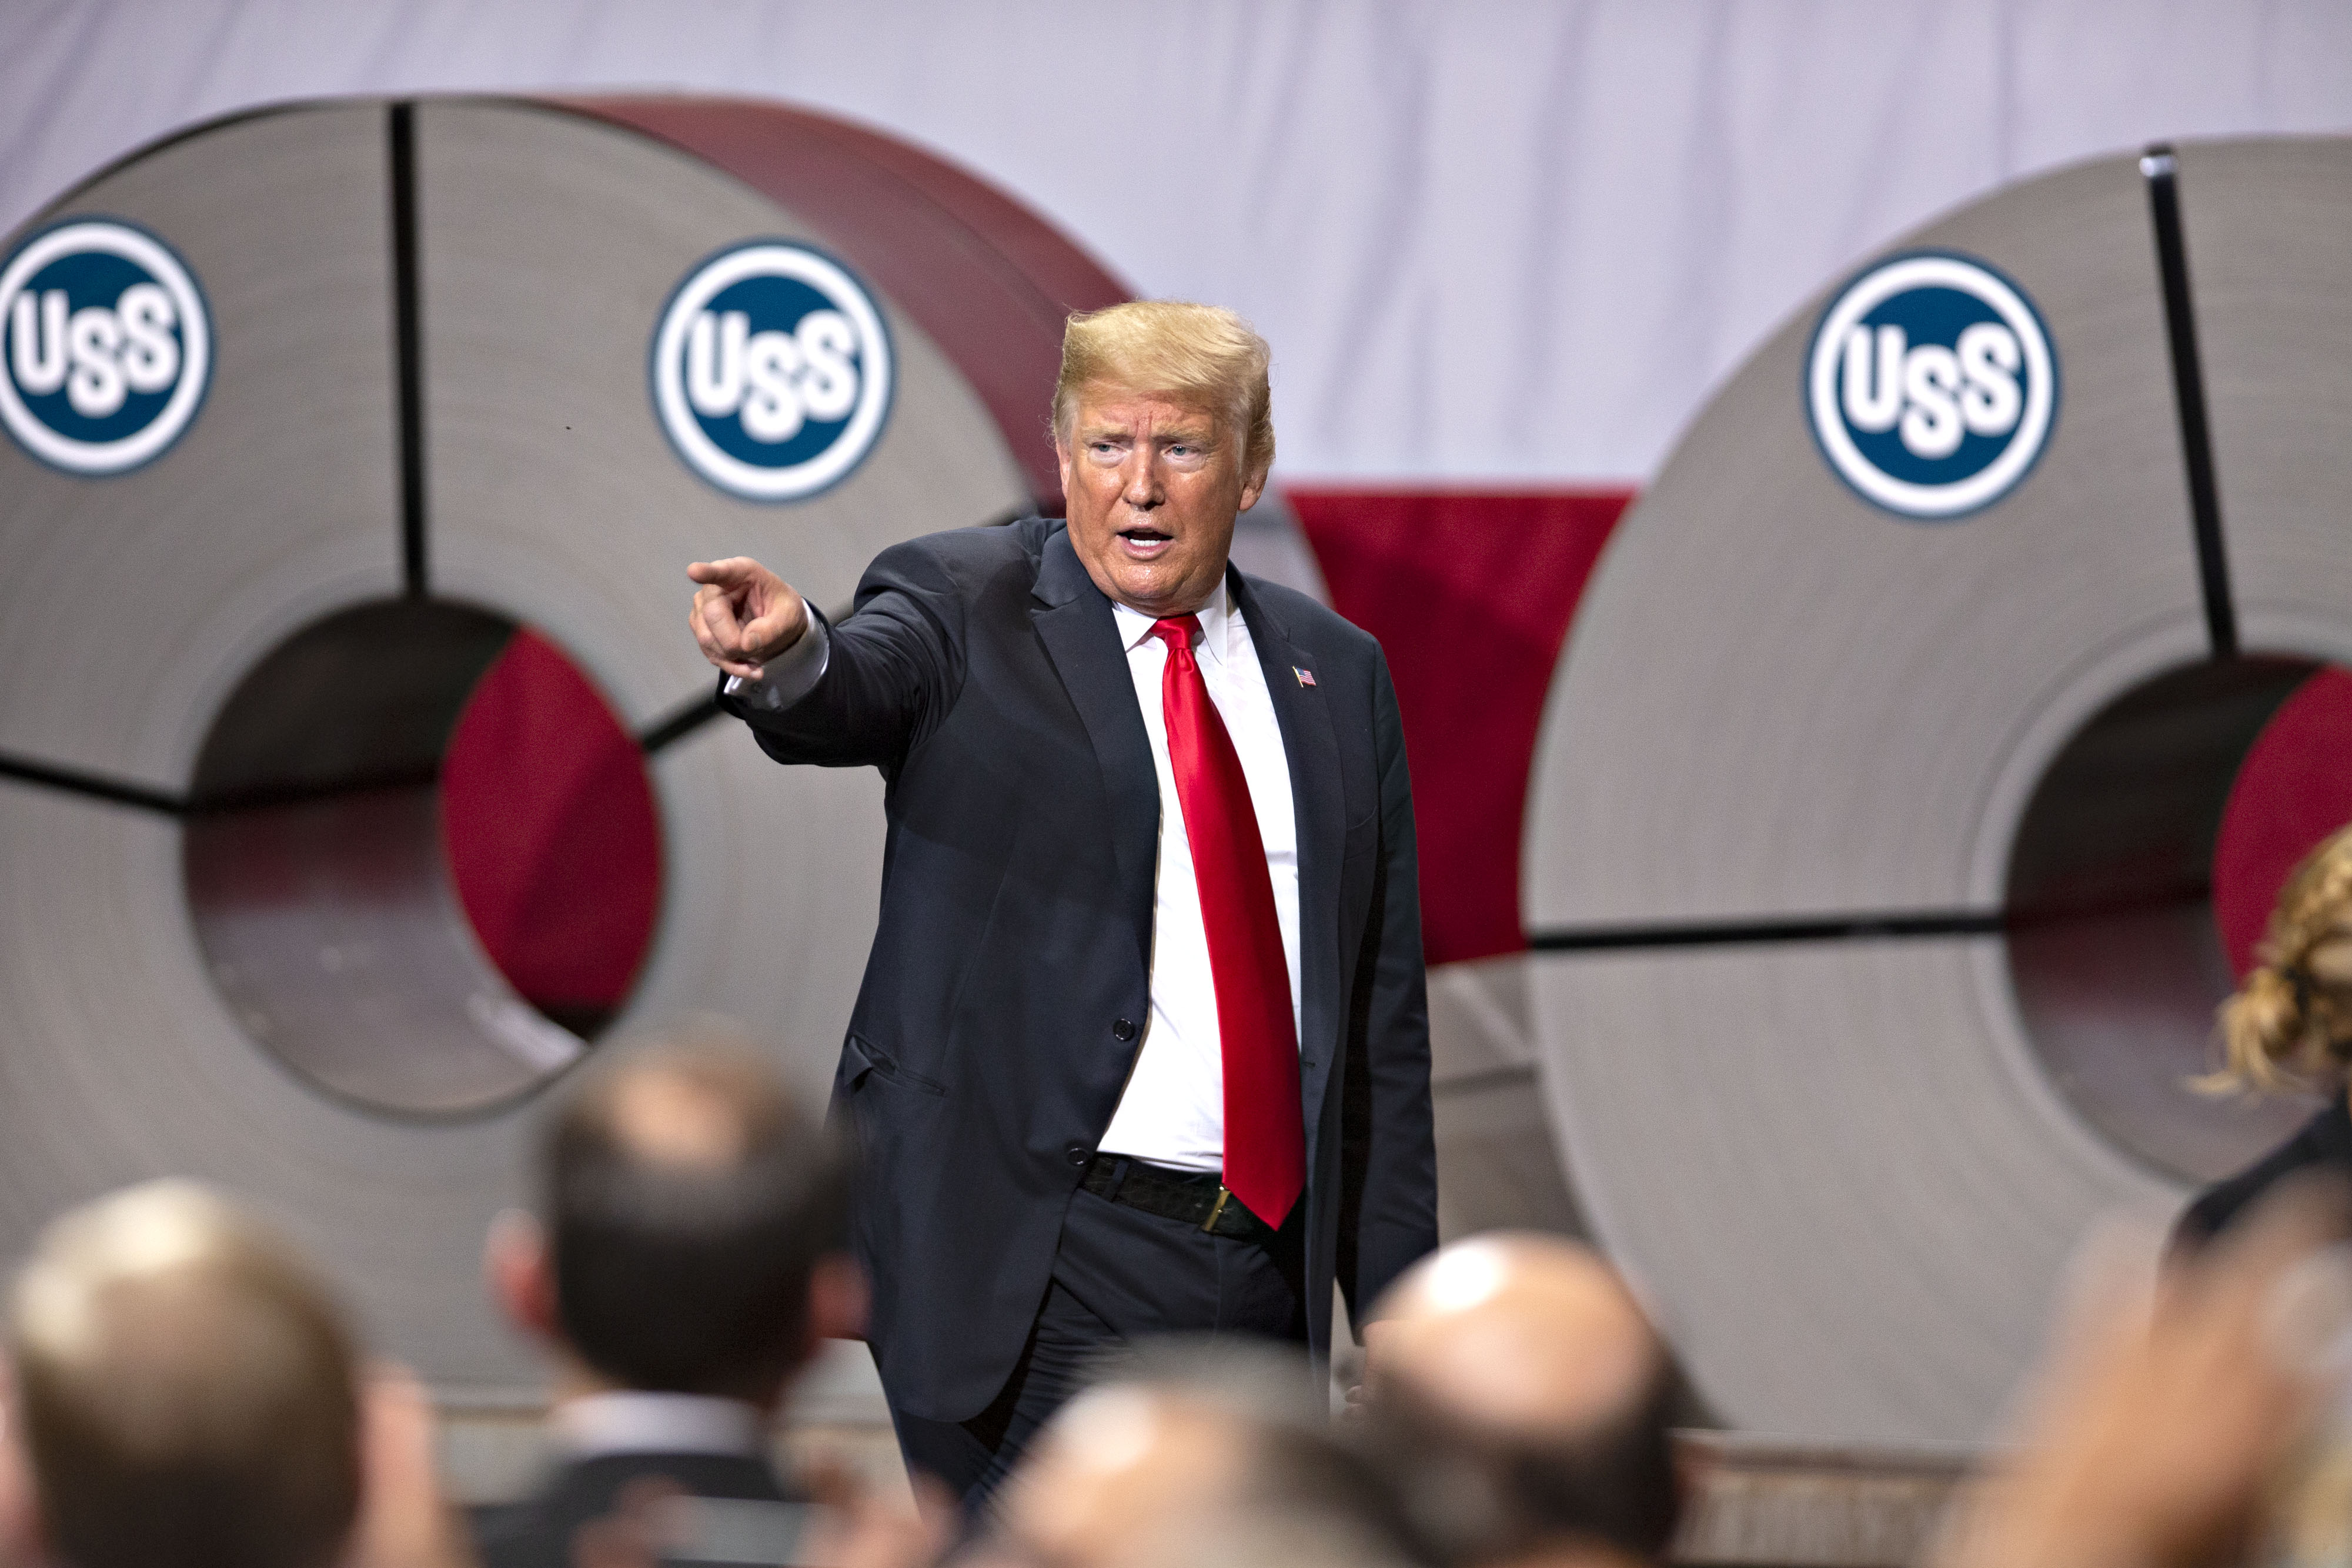 Donald Trump after speaking at the U.S. Steel Corp. Granite City Works facility in Illinois,&nbsp;2018